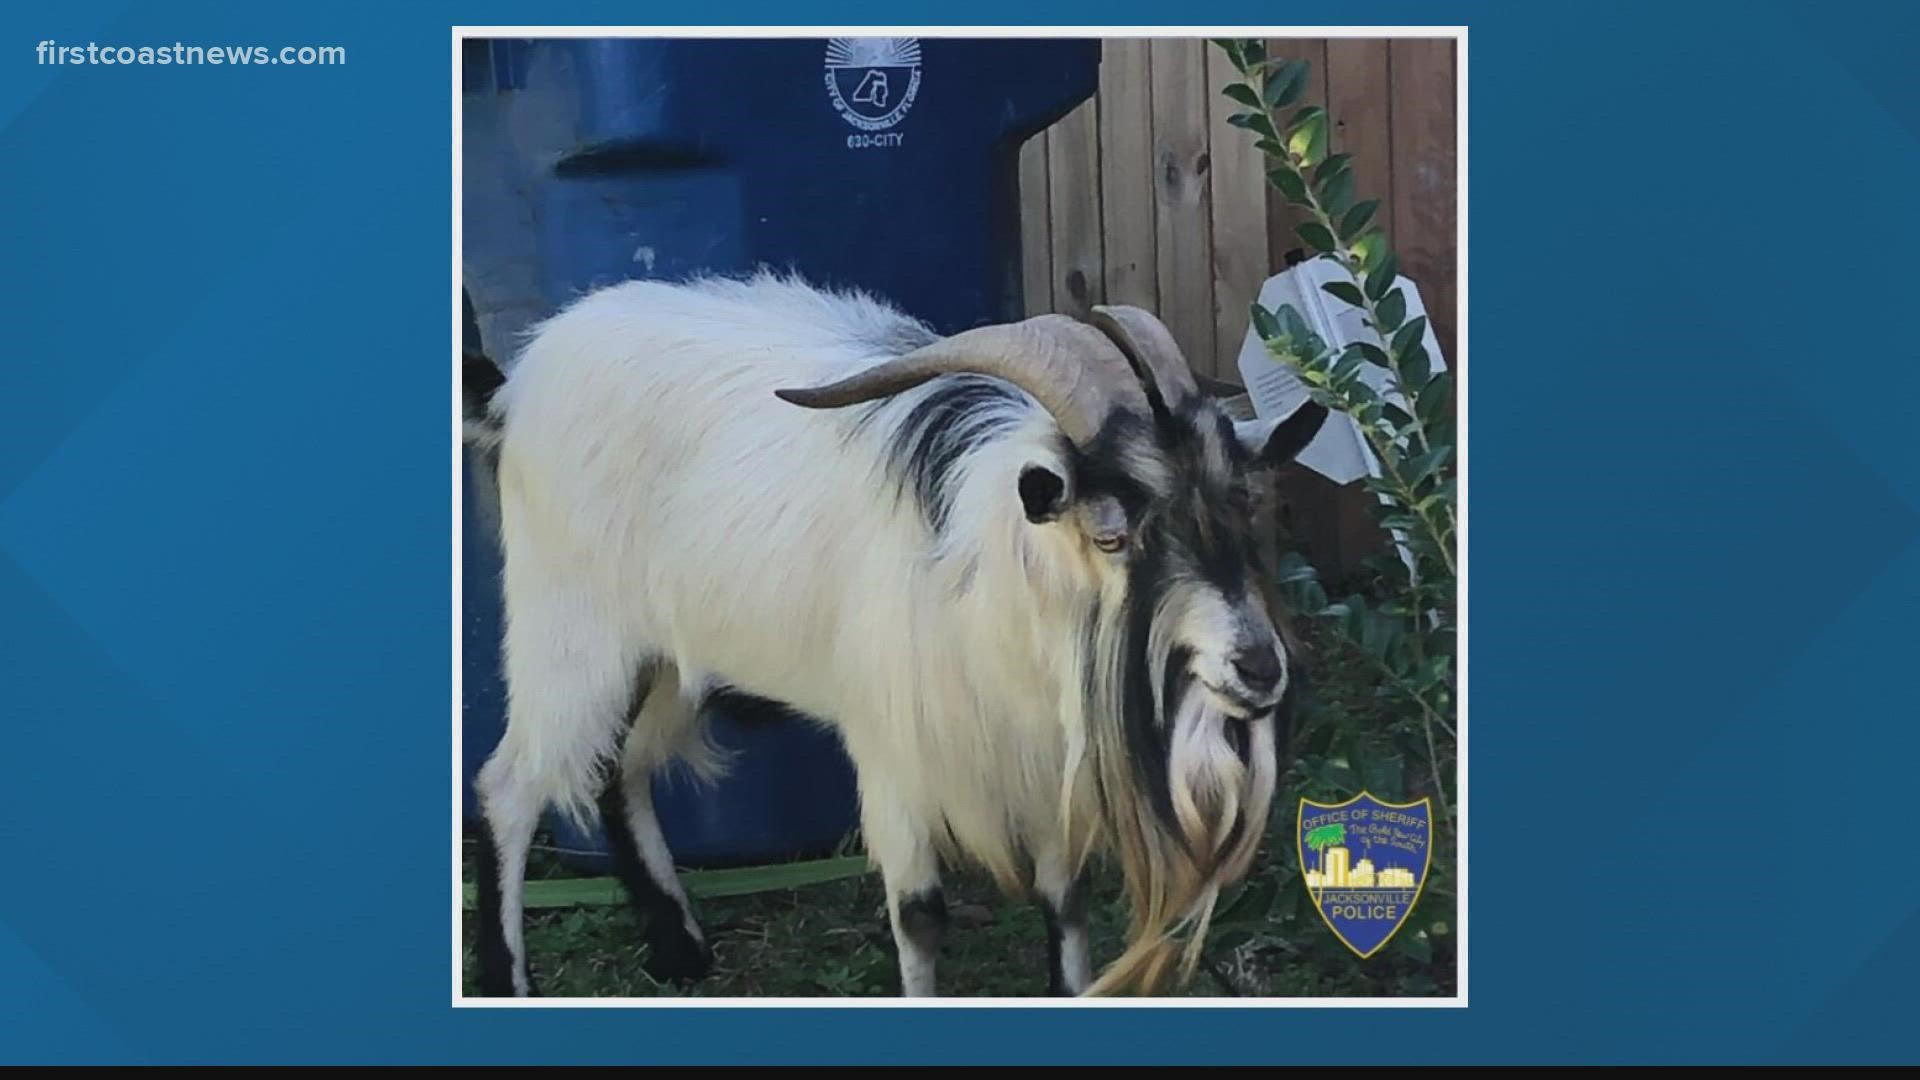 The goat was found in the University Park area.